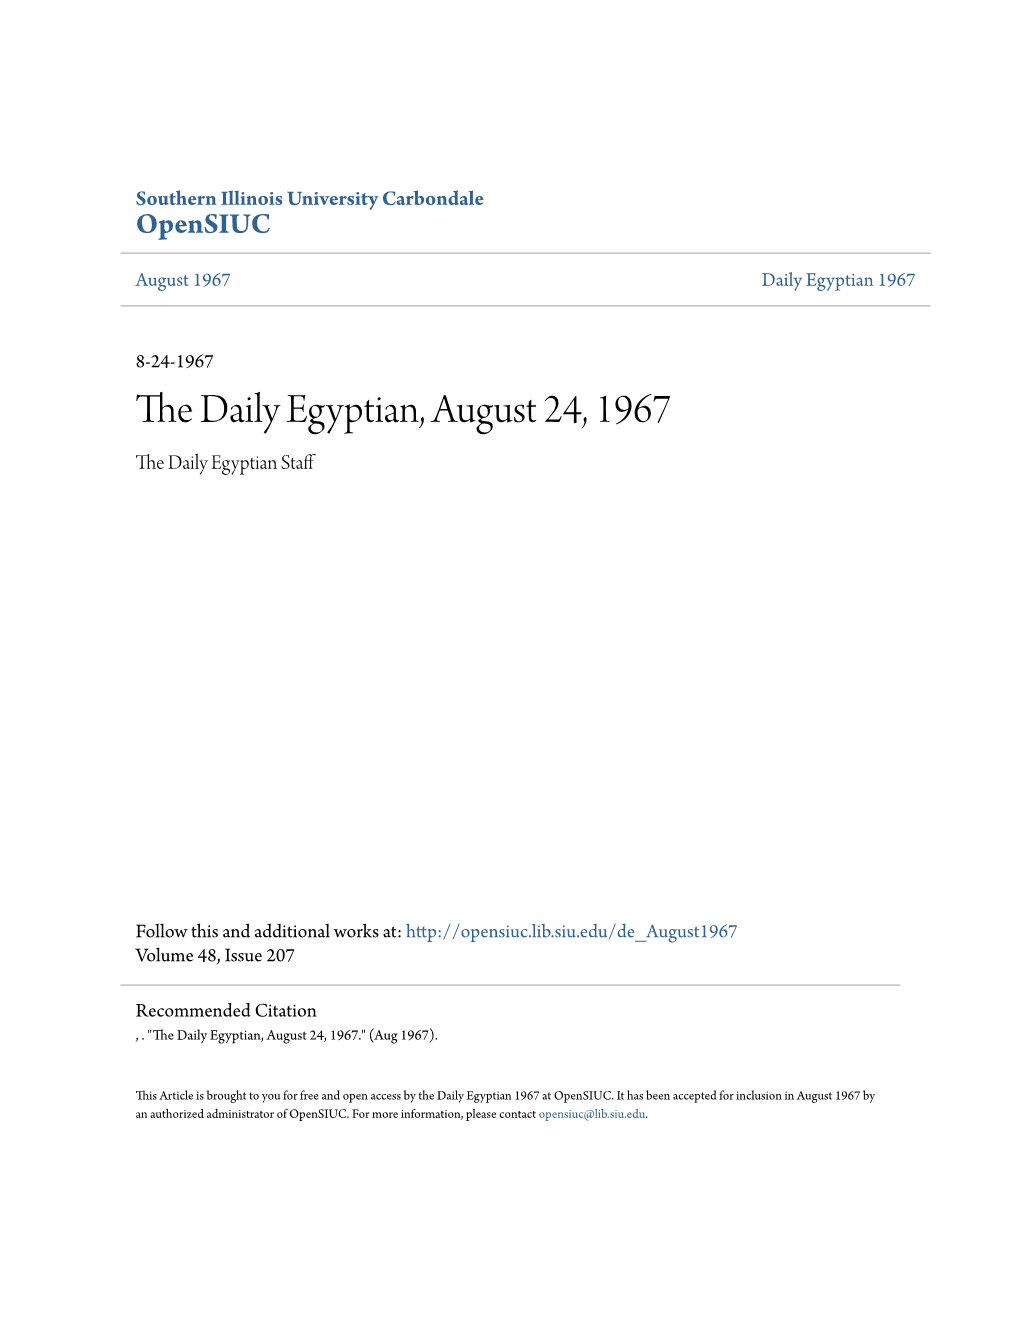 The Daily Egyptian, August 24, 1967